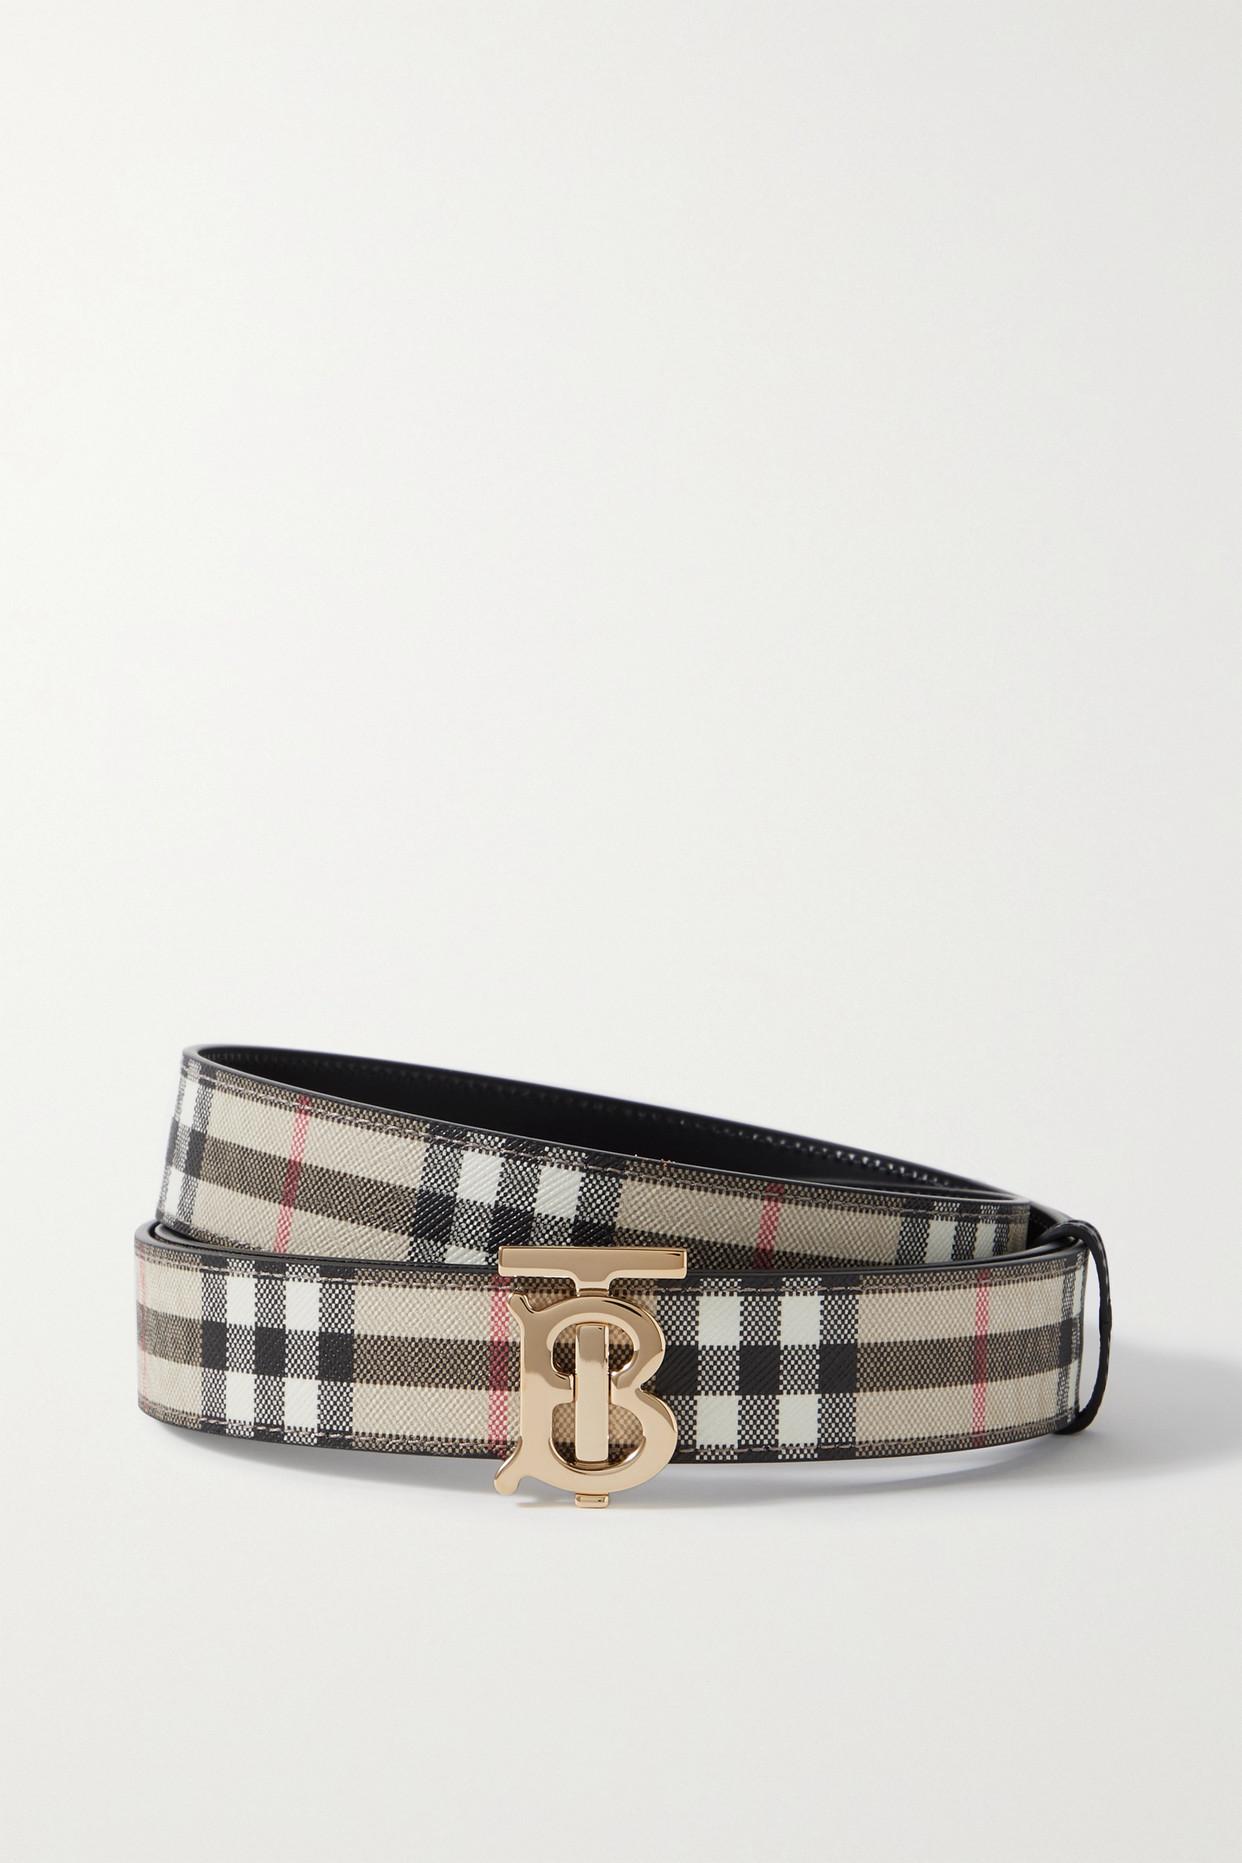 Burberry TB Monogram Motif Canvas and Leather Belt In Natural Size